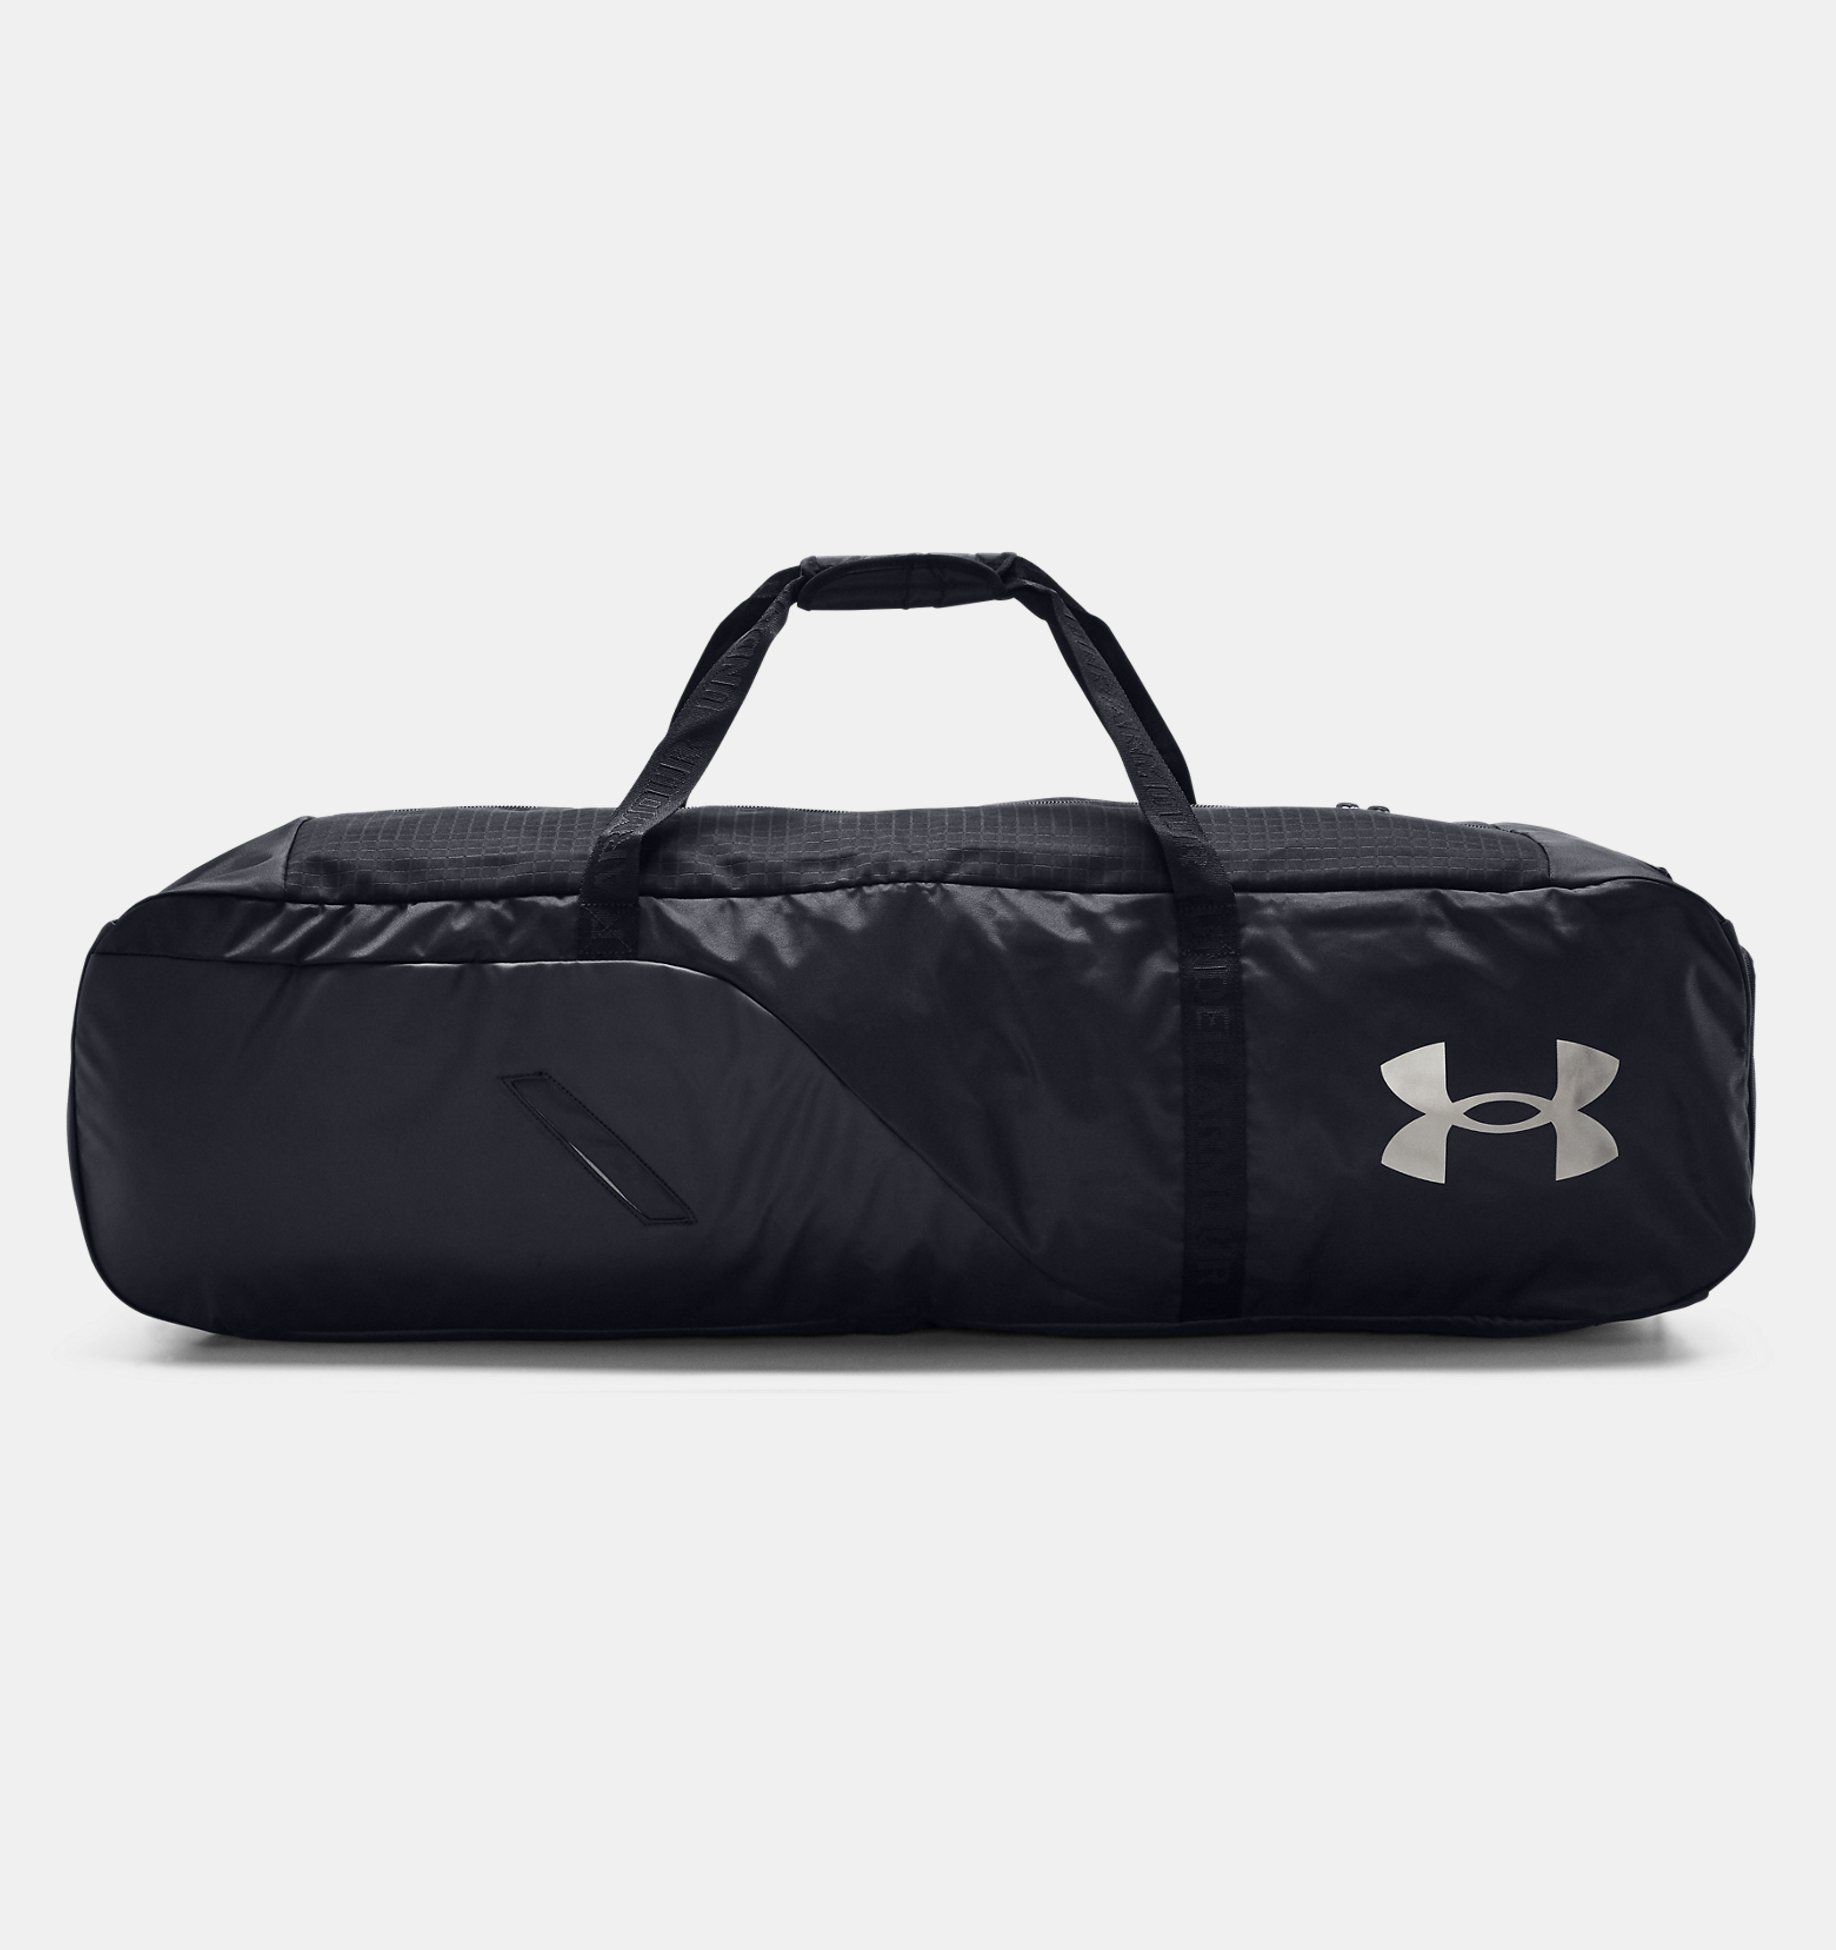 Black New With Tags New Under Armour Lacrosse Travel Bag 44x7x12” 